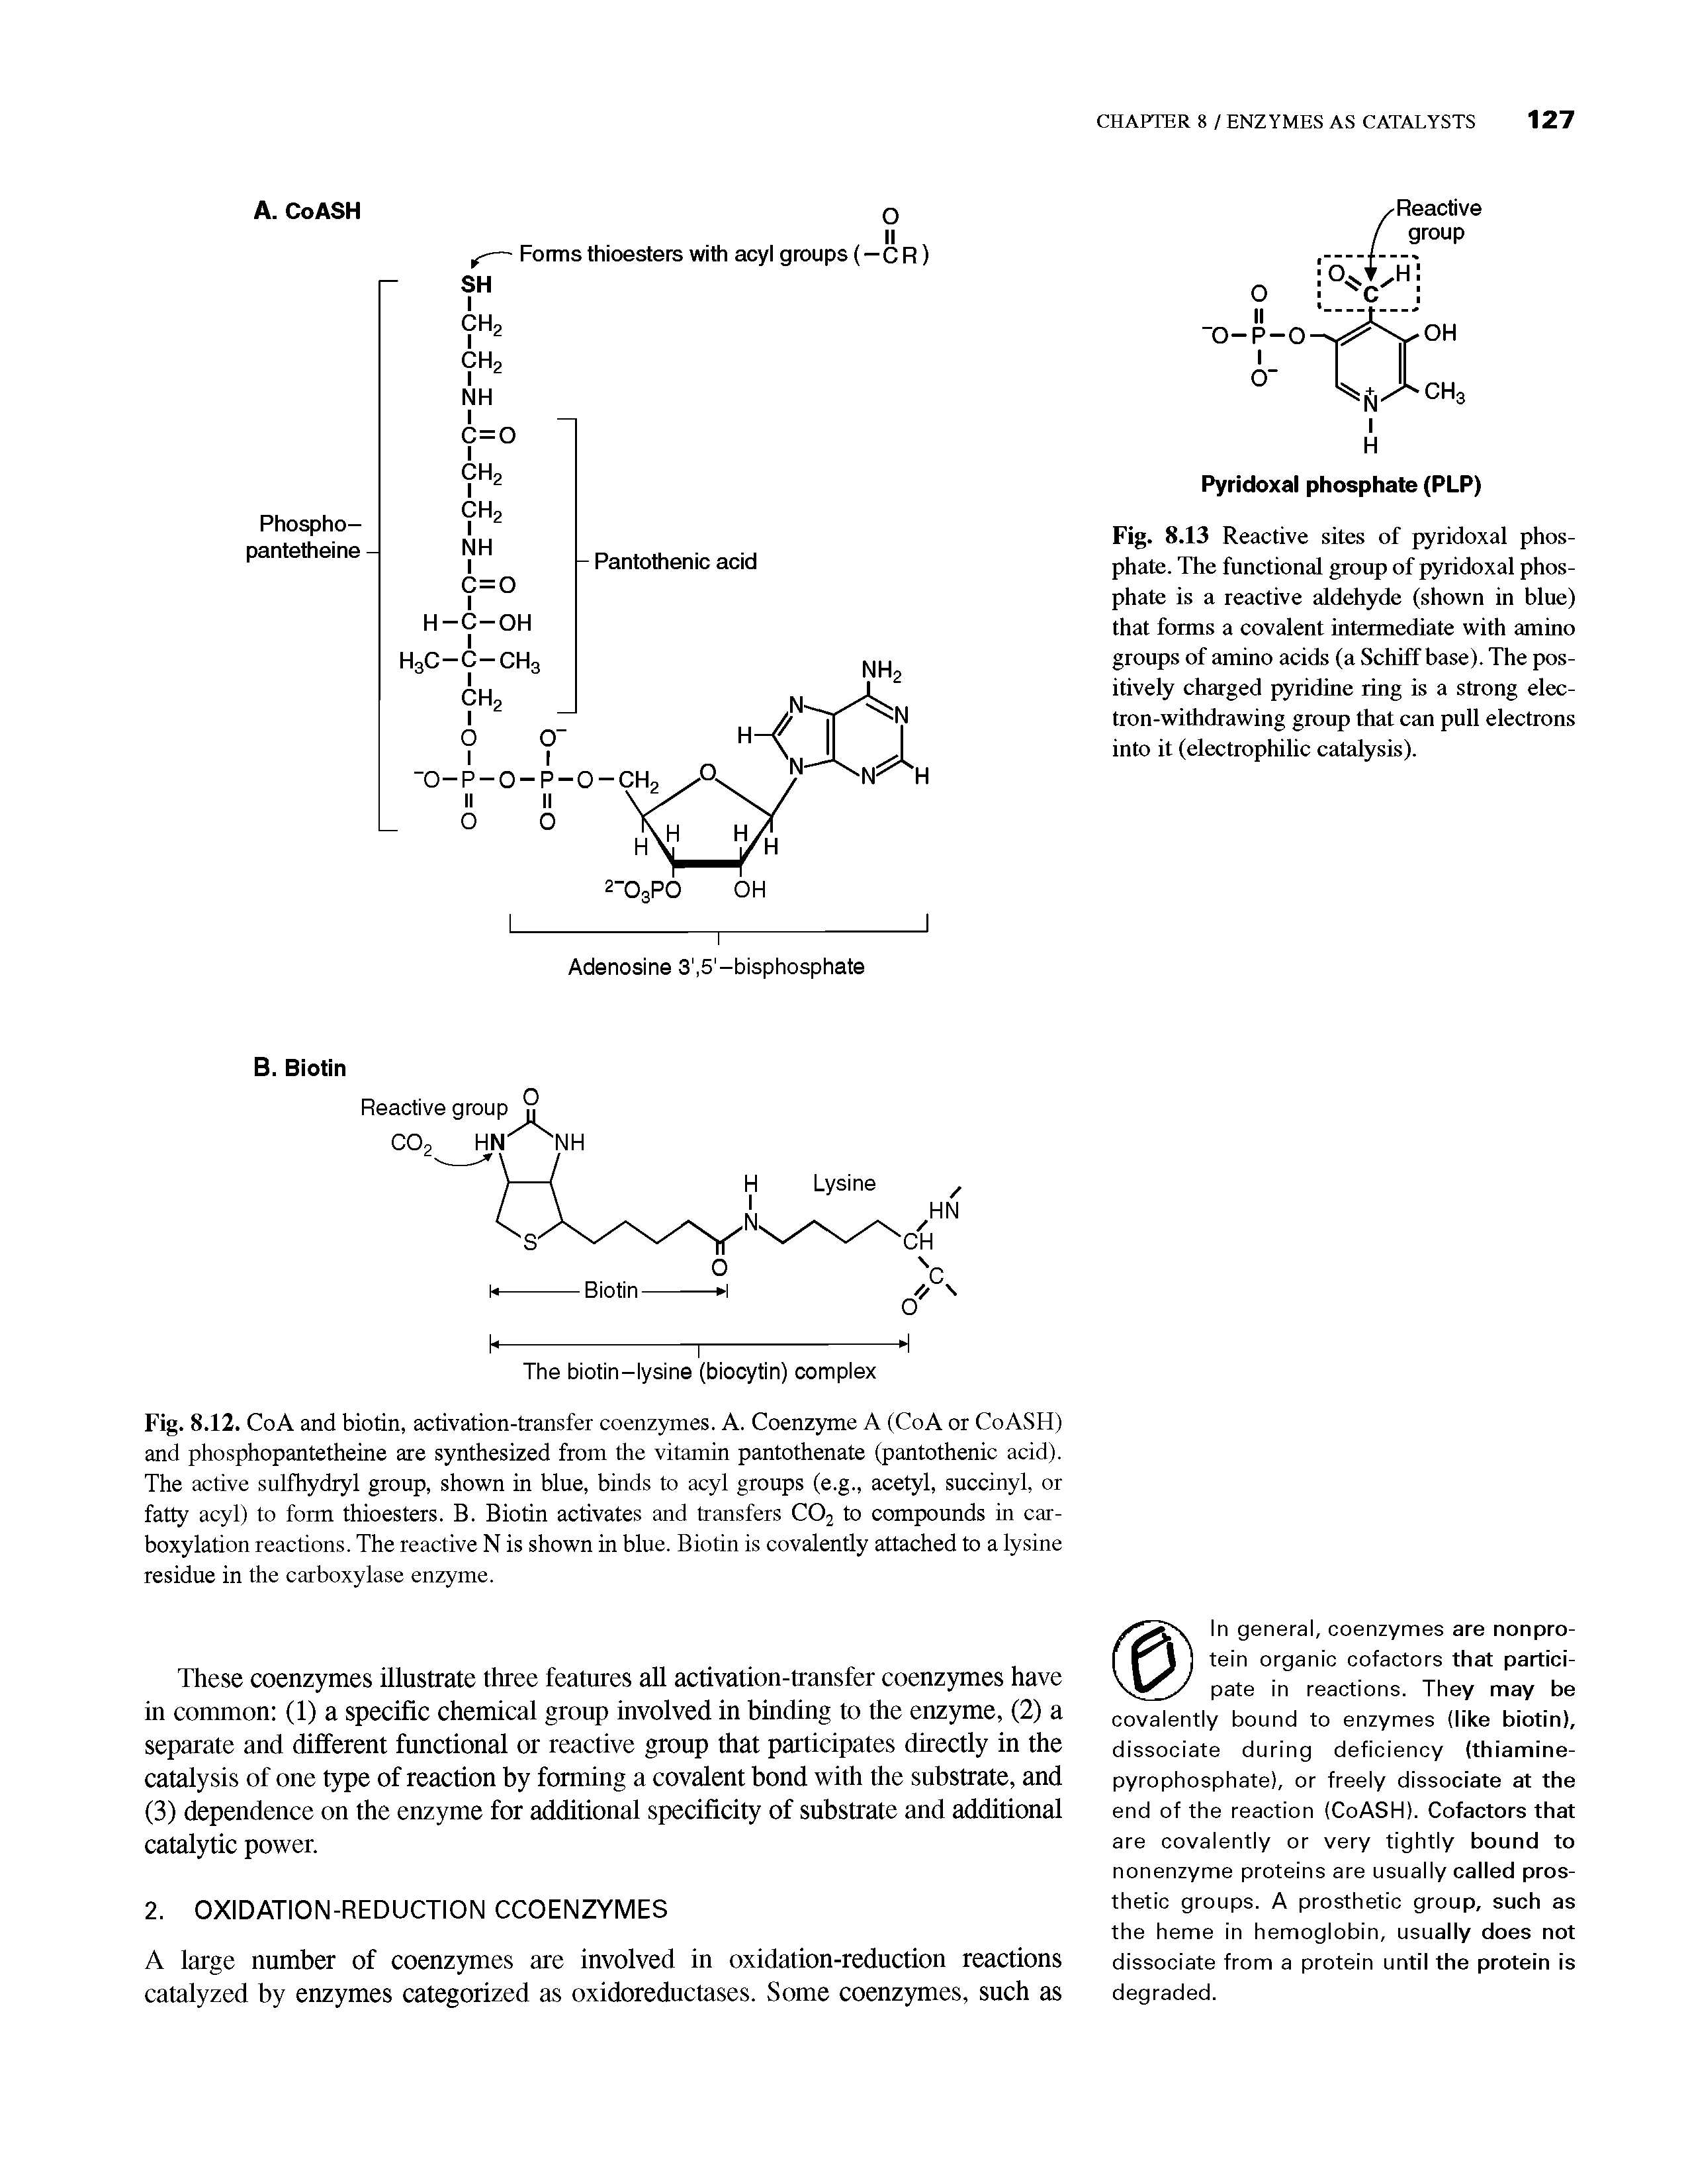 Fig. 8.12. CoA and biotin, activation-transfer coenzymes. A. Coenzyme A (CoA or CoASH) and phosphopantetheine are synthesized from the vitamin pantothenate (pantothenic acid). The active sulfhydryl group, shown in blue, binds to acyl groups (e.g., acetyl, succinyl, or fatty acyl) to form thioesters. B. Biotin activates and transfers CO2 to compounds in car-boxylation reactions. The reactive N is shown in blue. Biotin is covalently attached to a lysine residue in the carboxylase enzyme.